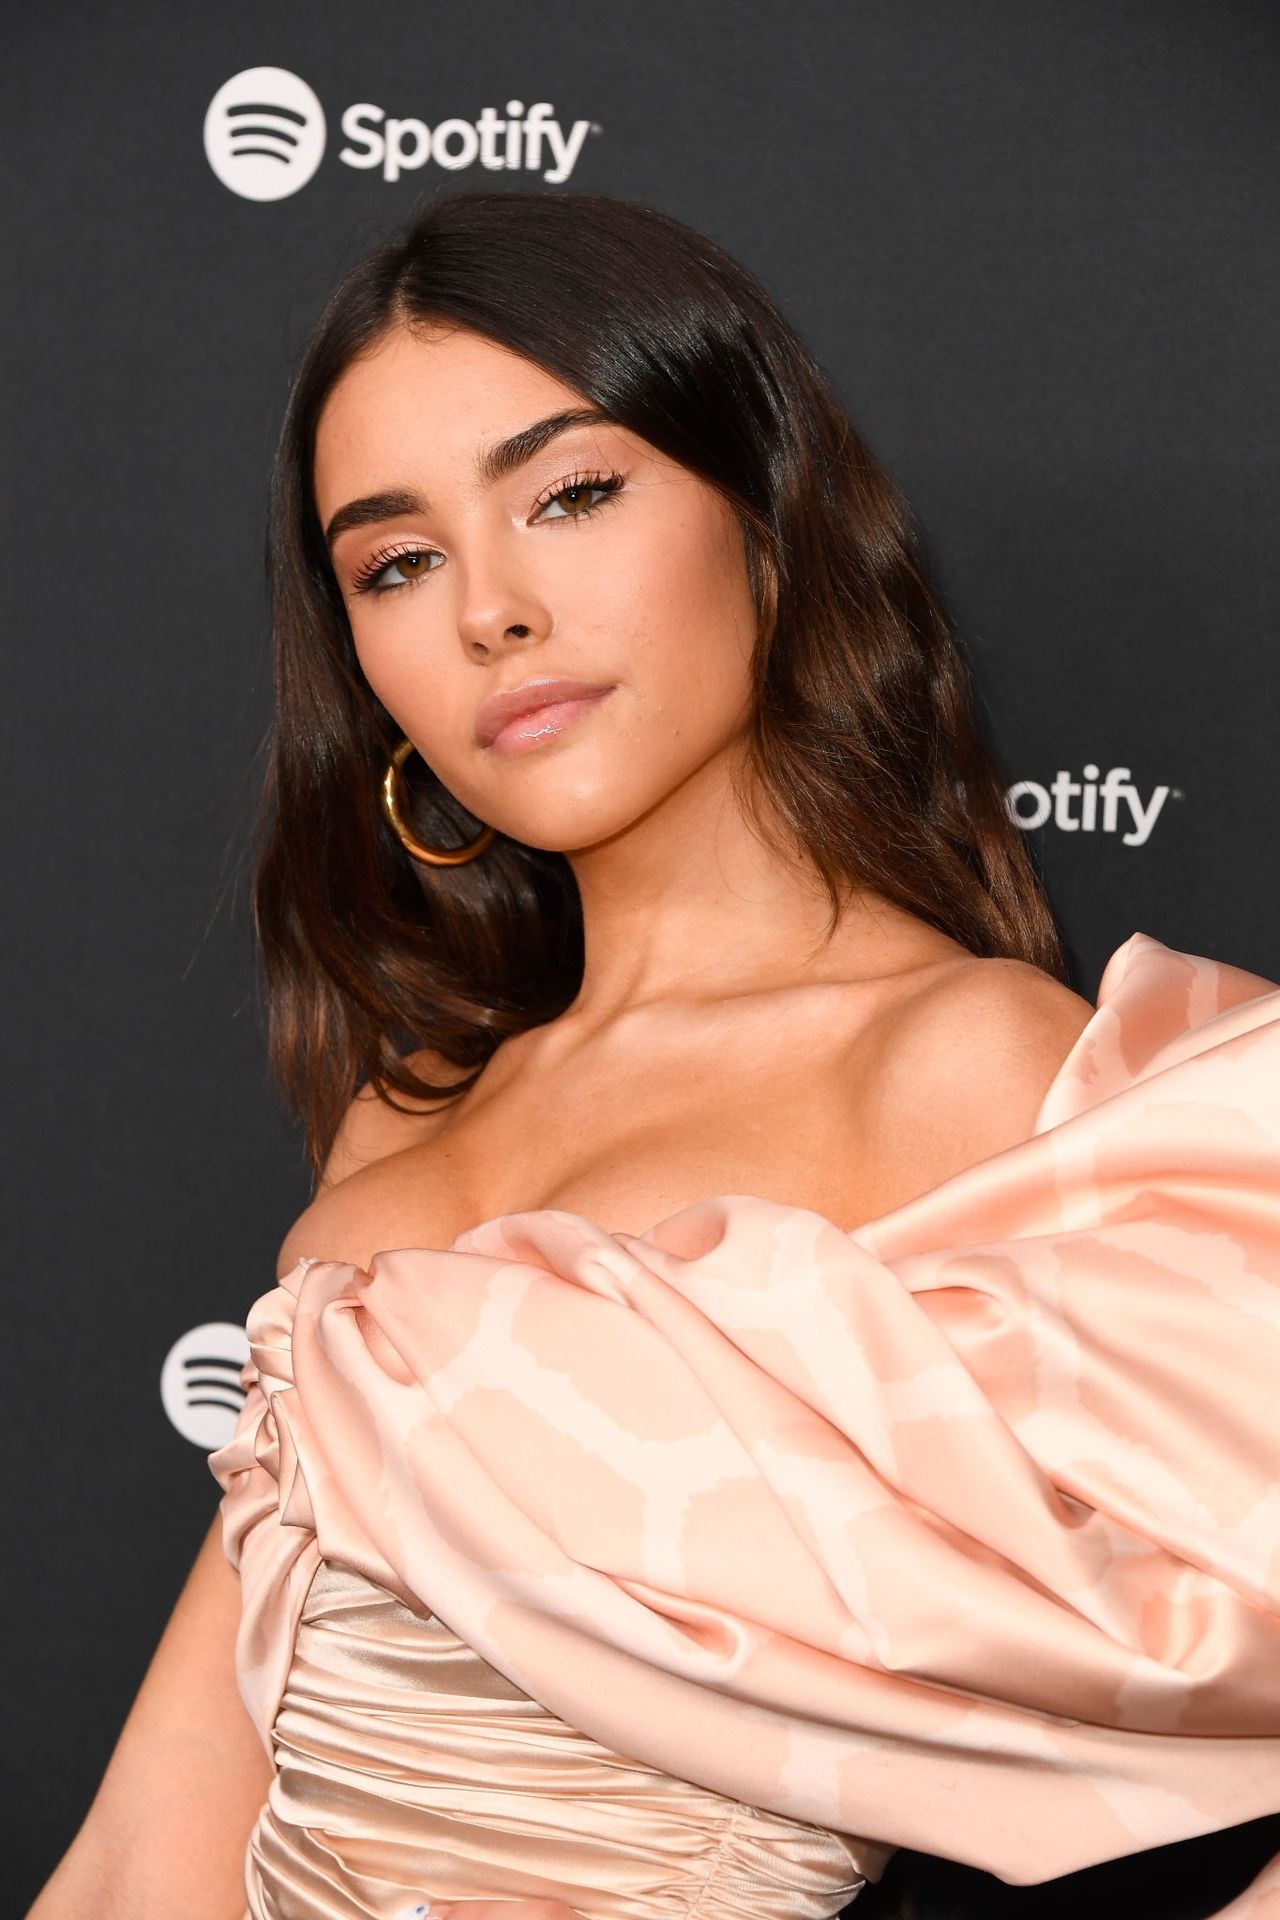 Madison Beer Displays Her Boobs At The Spotify Best New Artist Party 0021